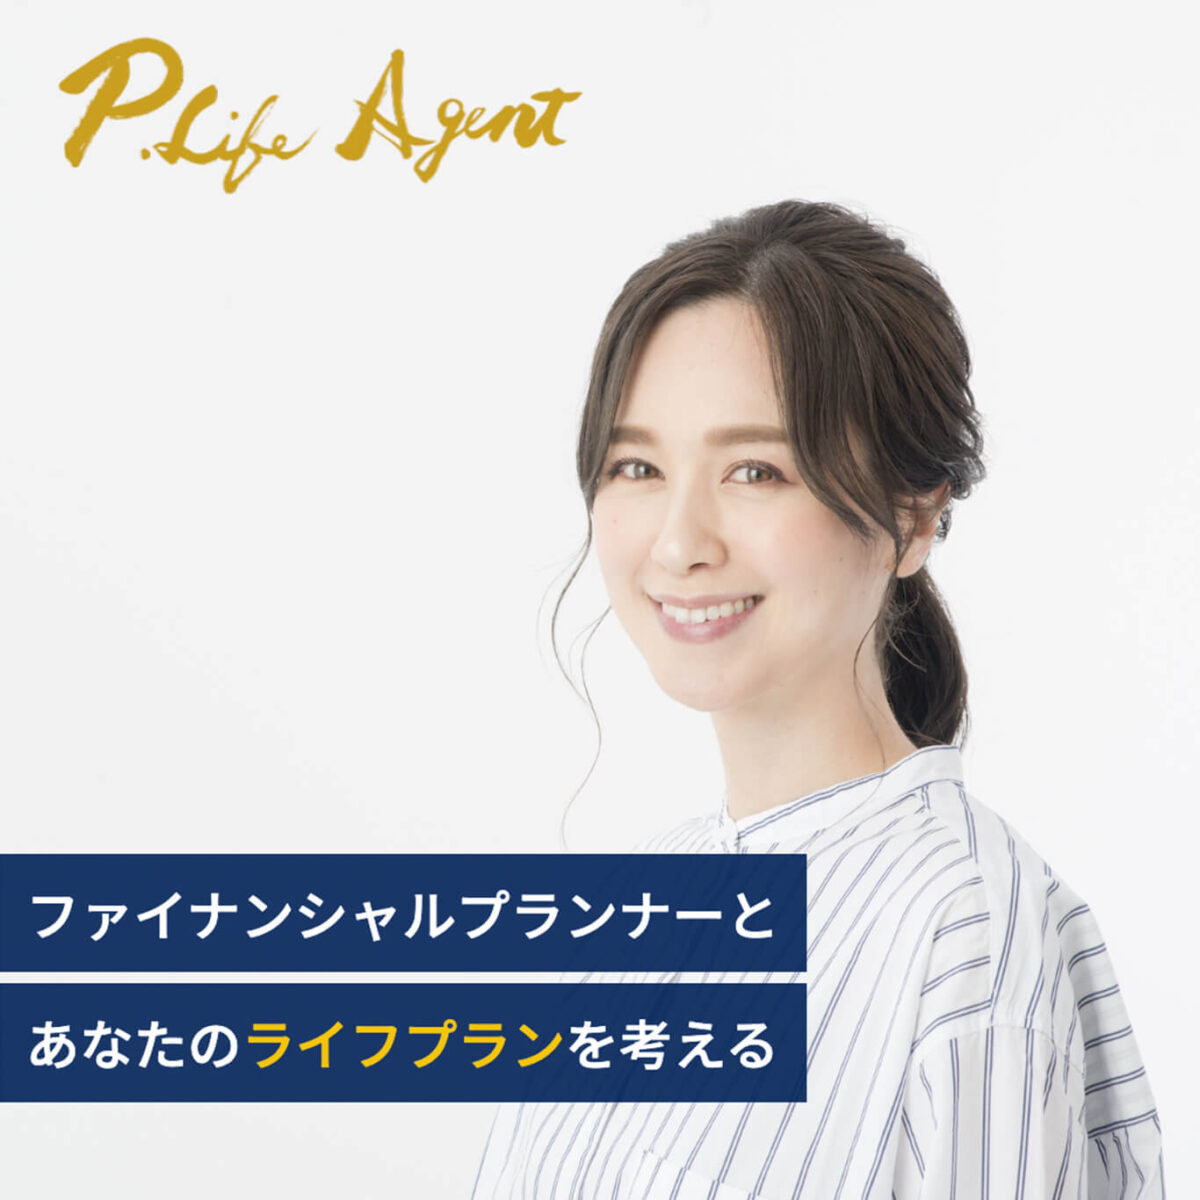 P. Lifeエージェント